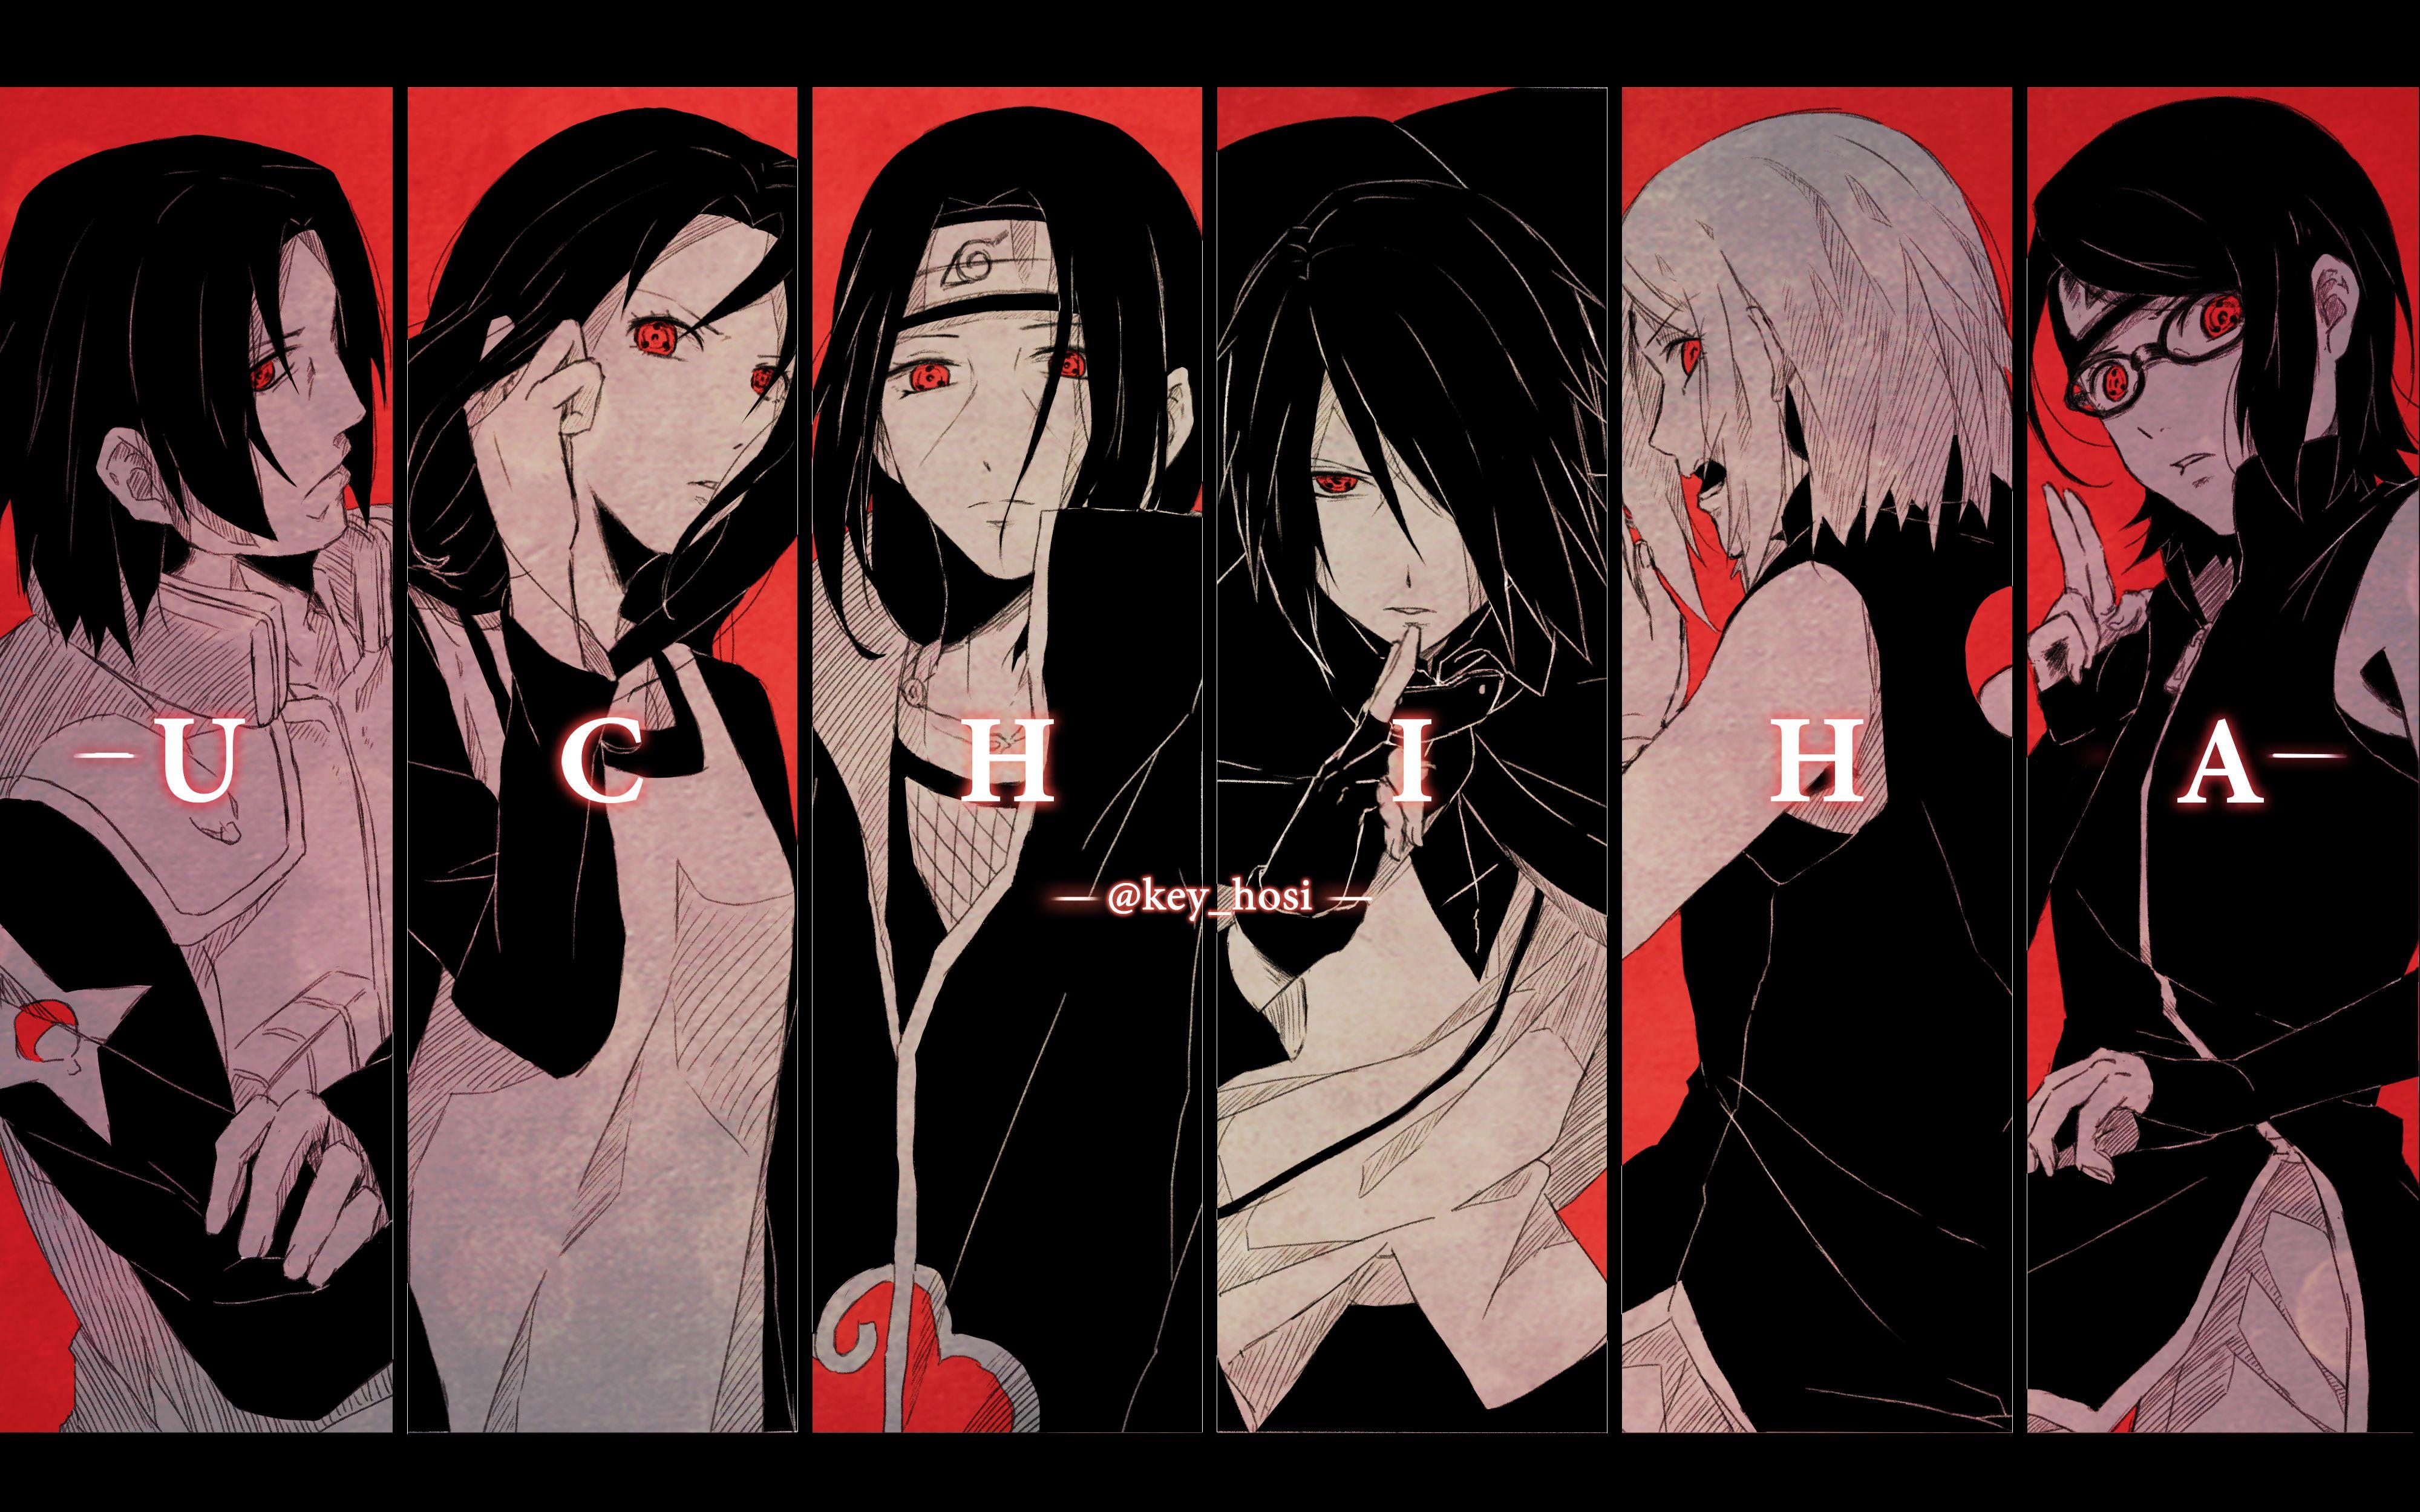 Aesthetic The Uchiha Clan Wallpapers - Wallpaper Cave